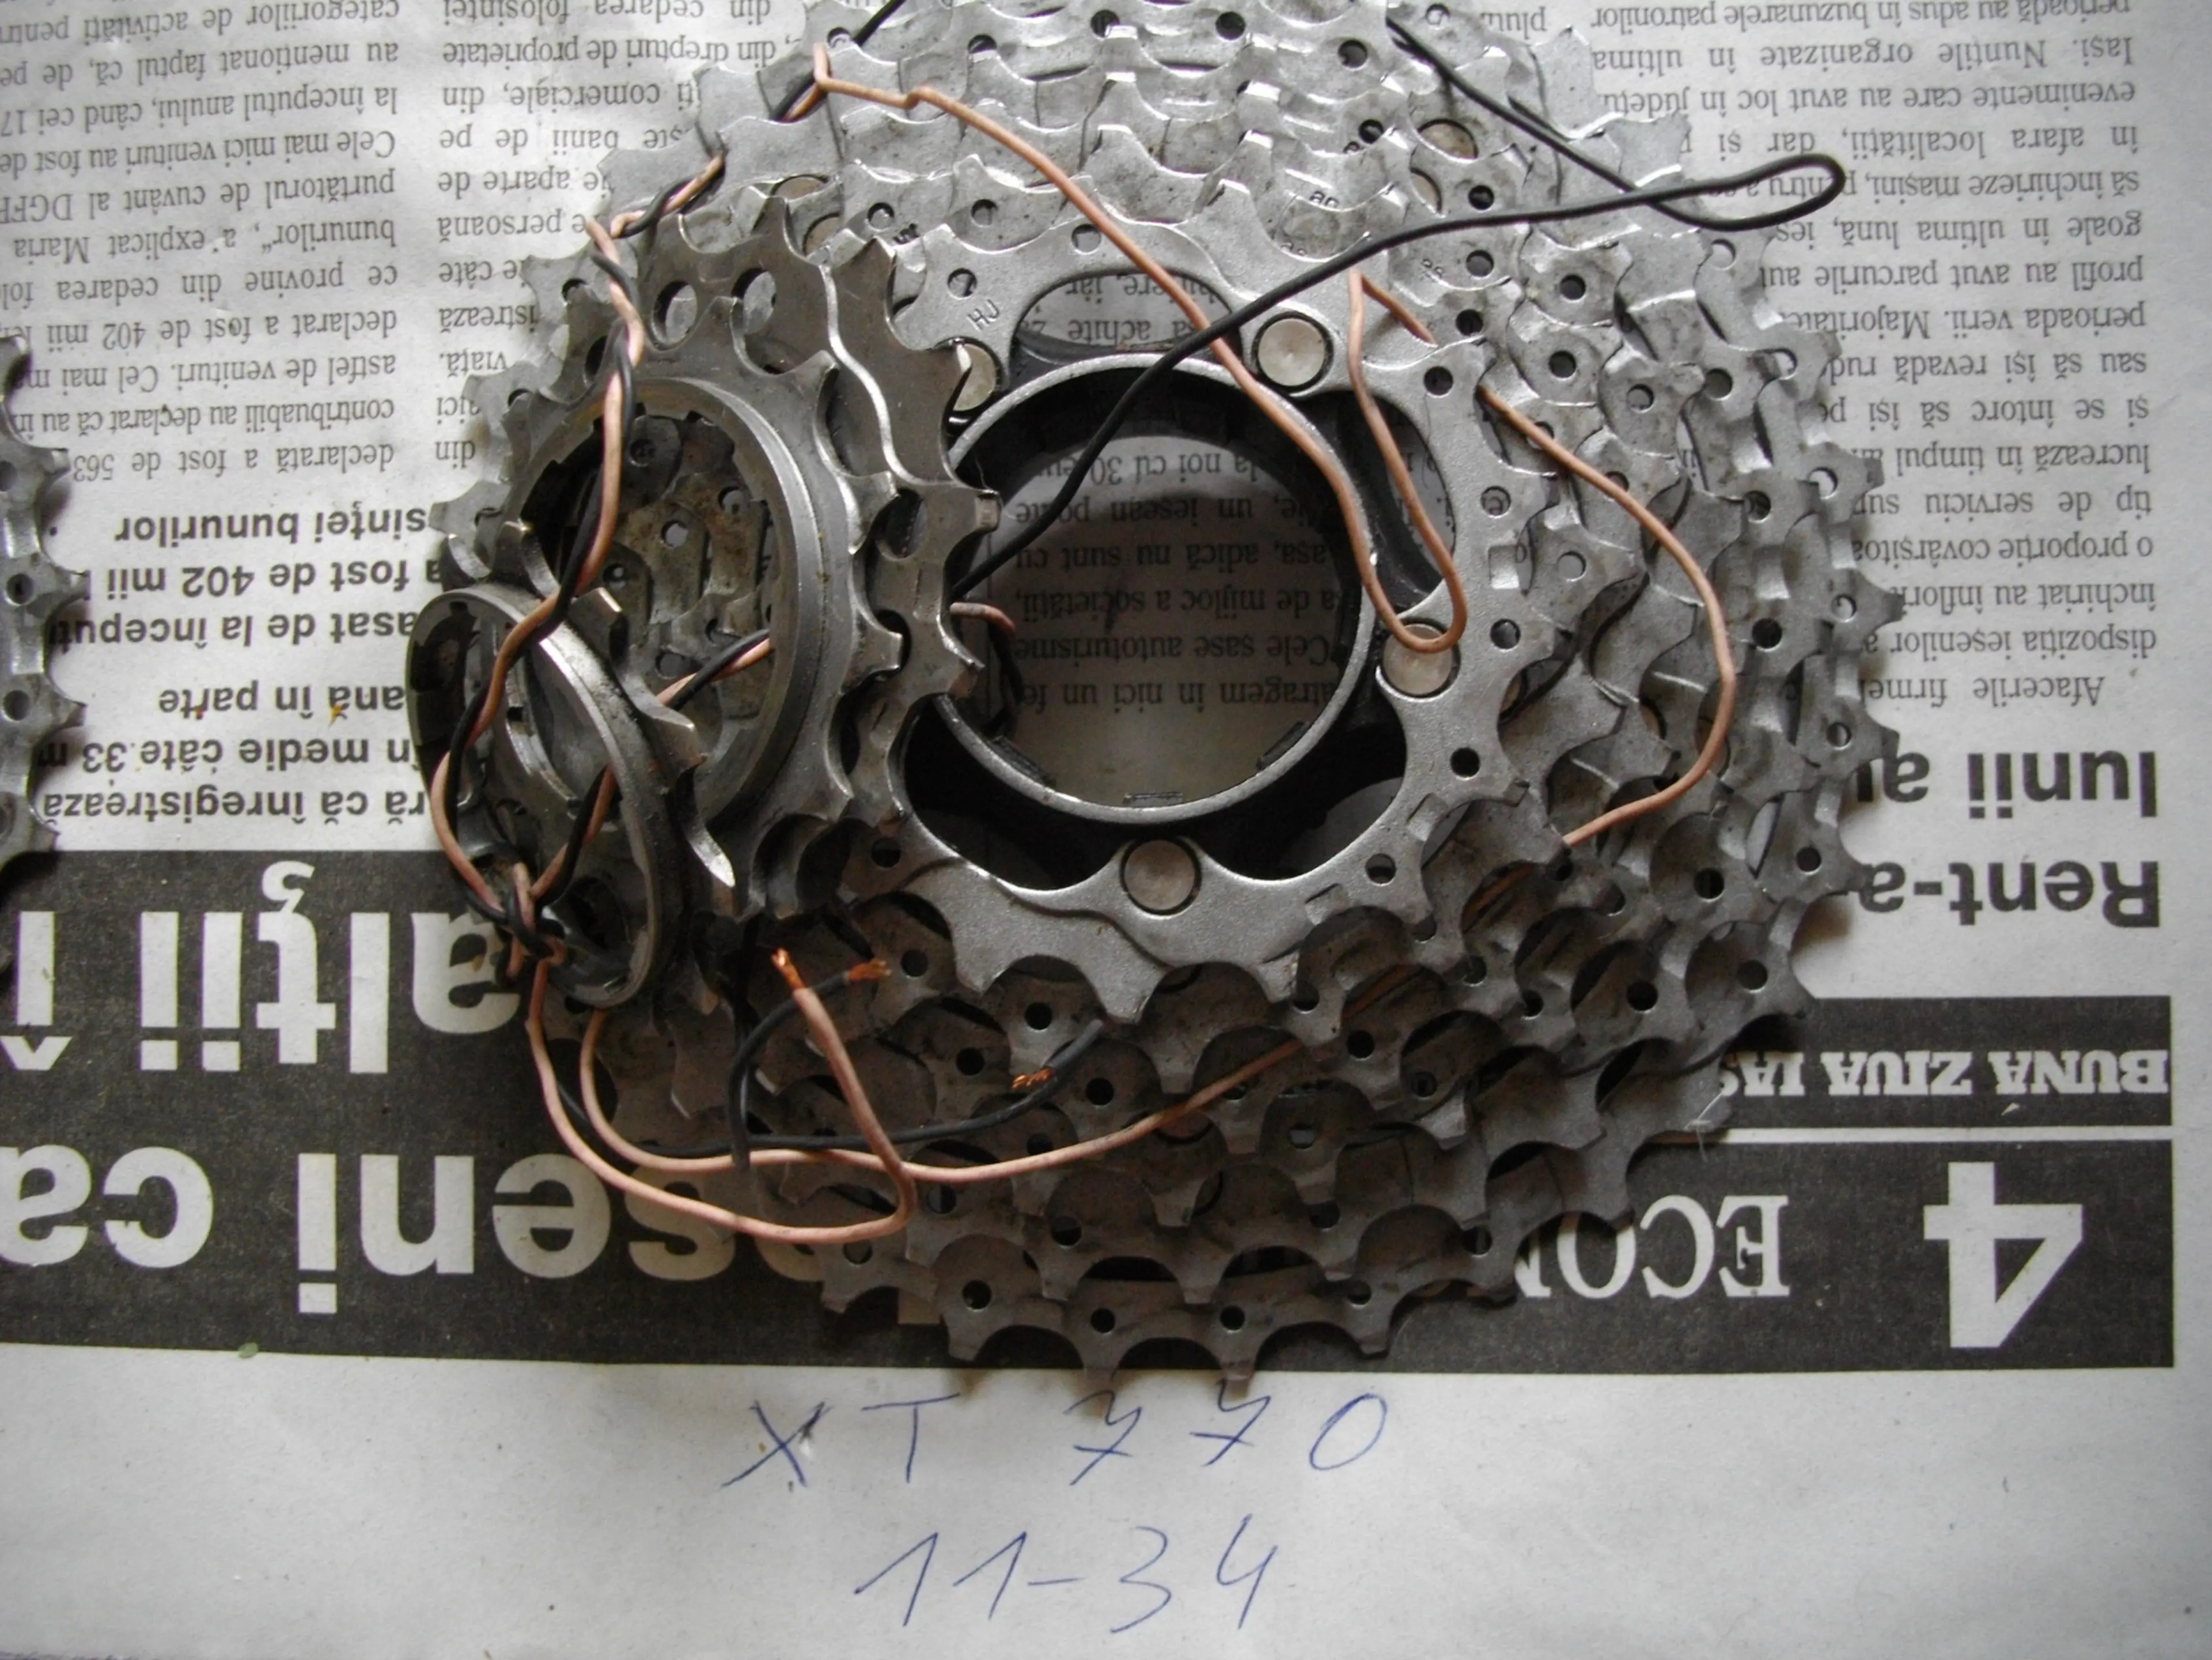 1. Shimano deore xt spider m770